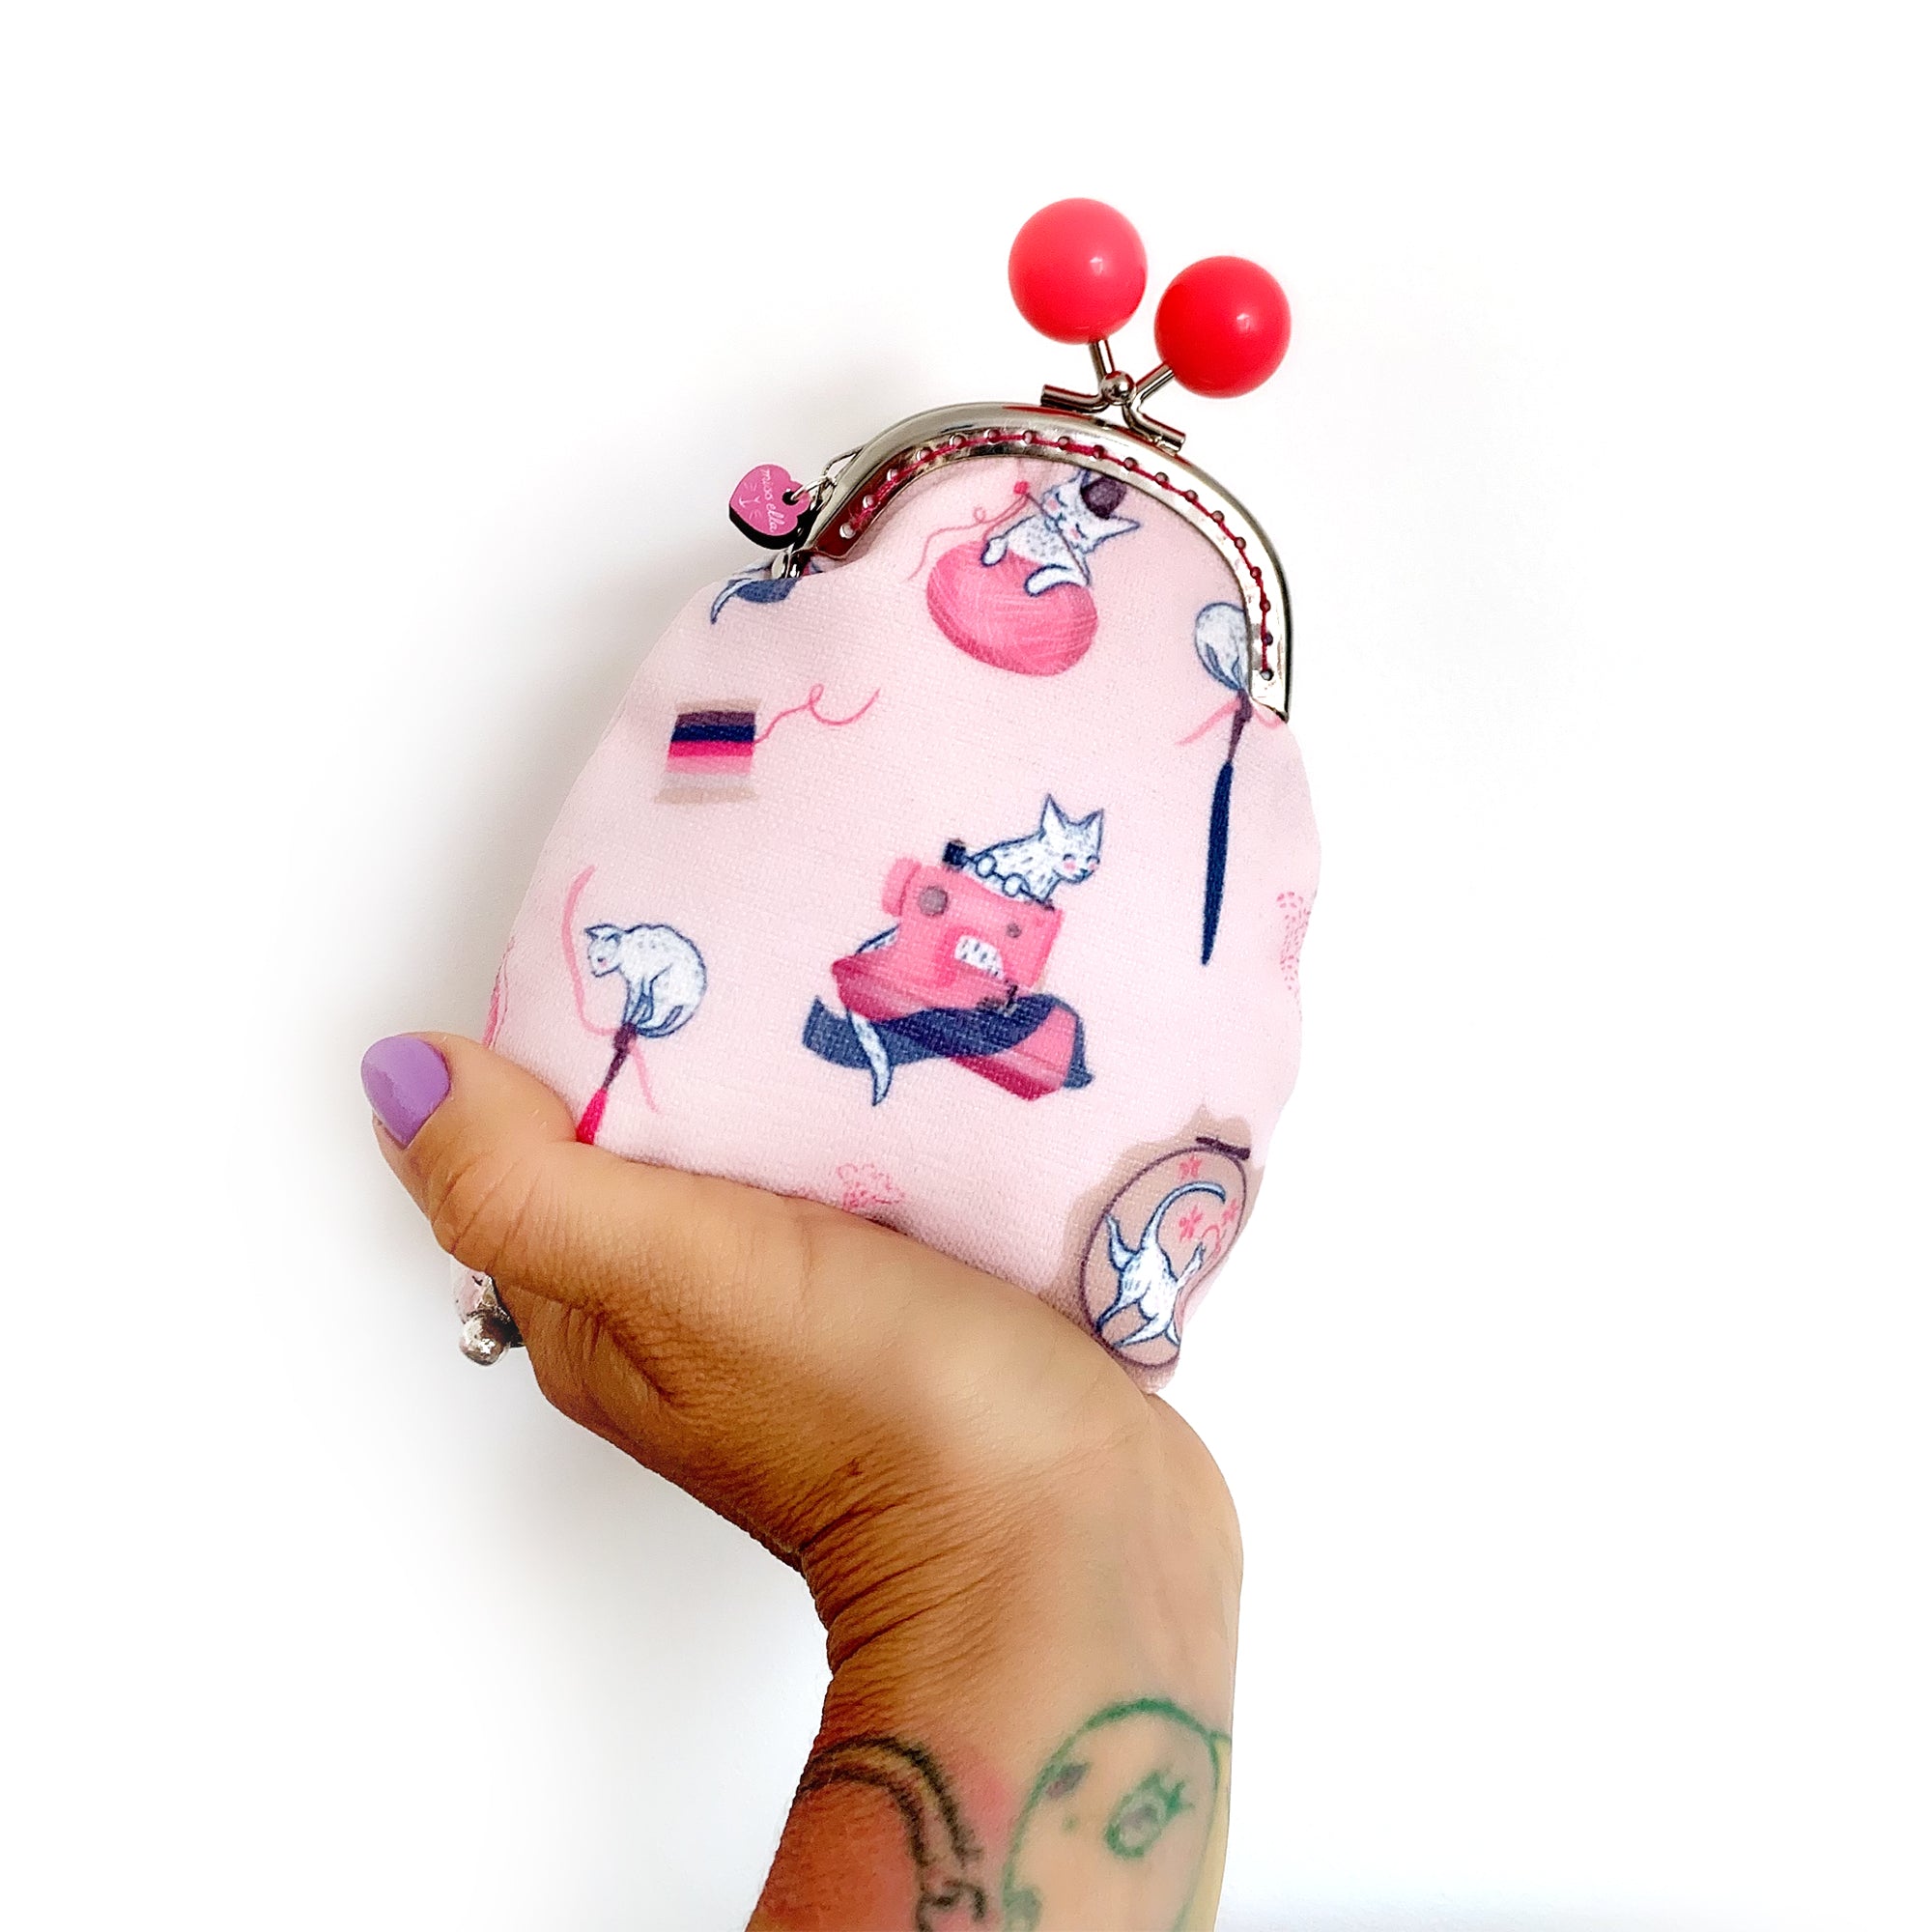 Sewing Cats Bobble Purse